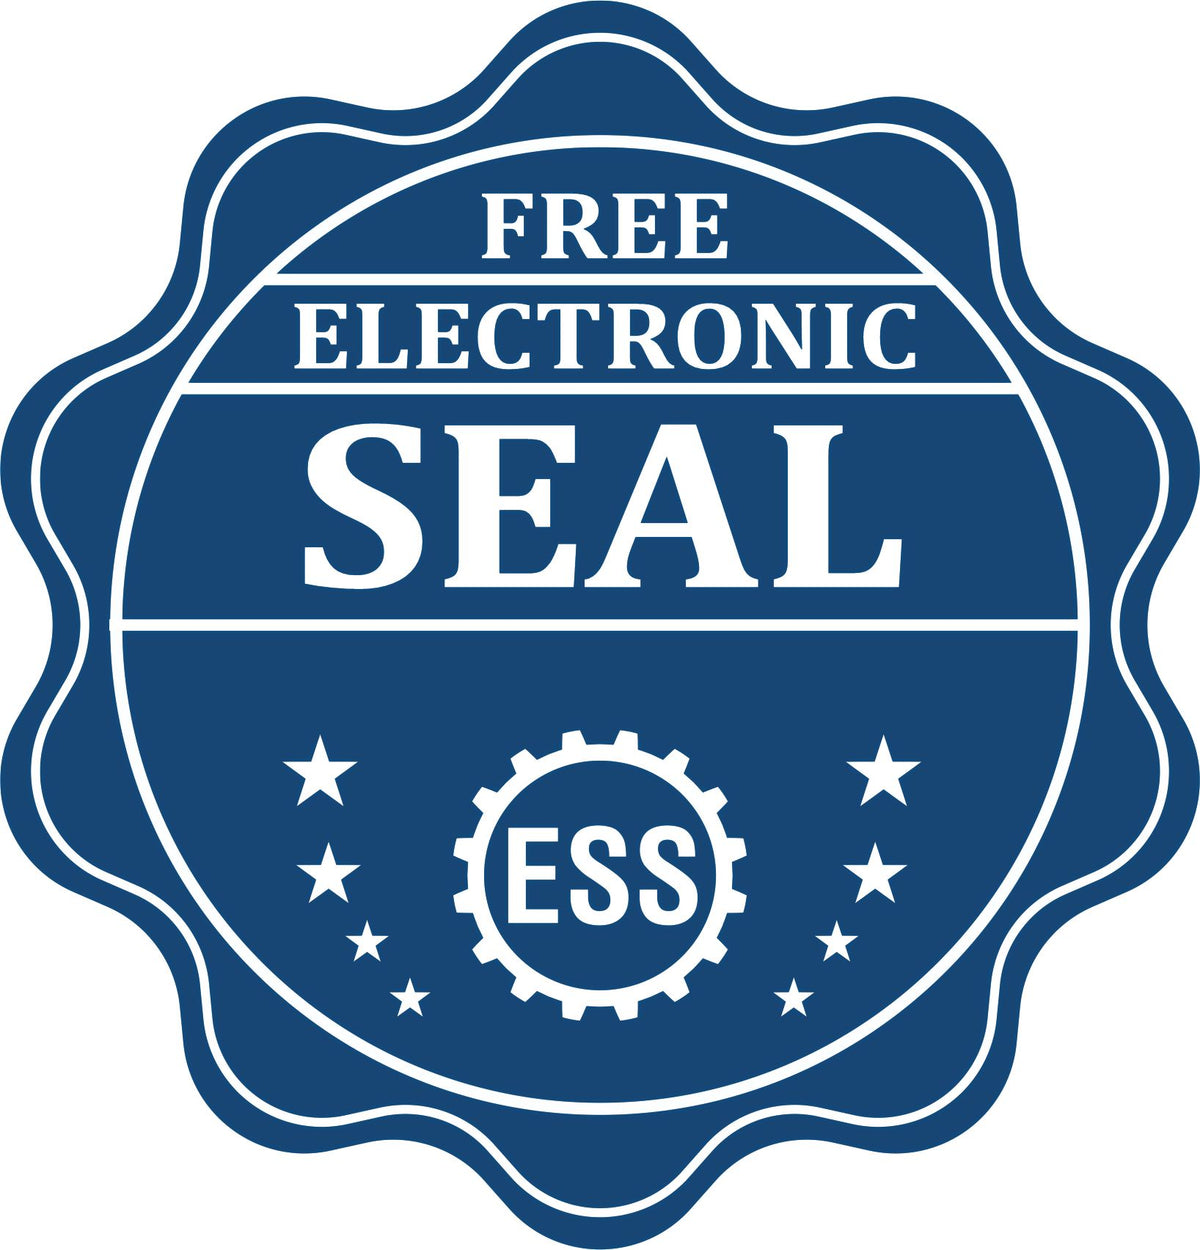 A badge showing a free electronic seal for the Long Reach Connecticut PE Seal with stars and the ESS gear on the emblem.